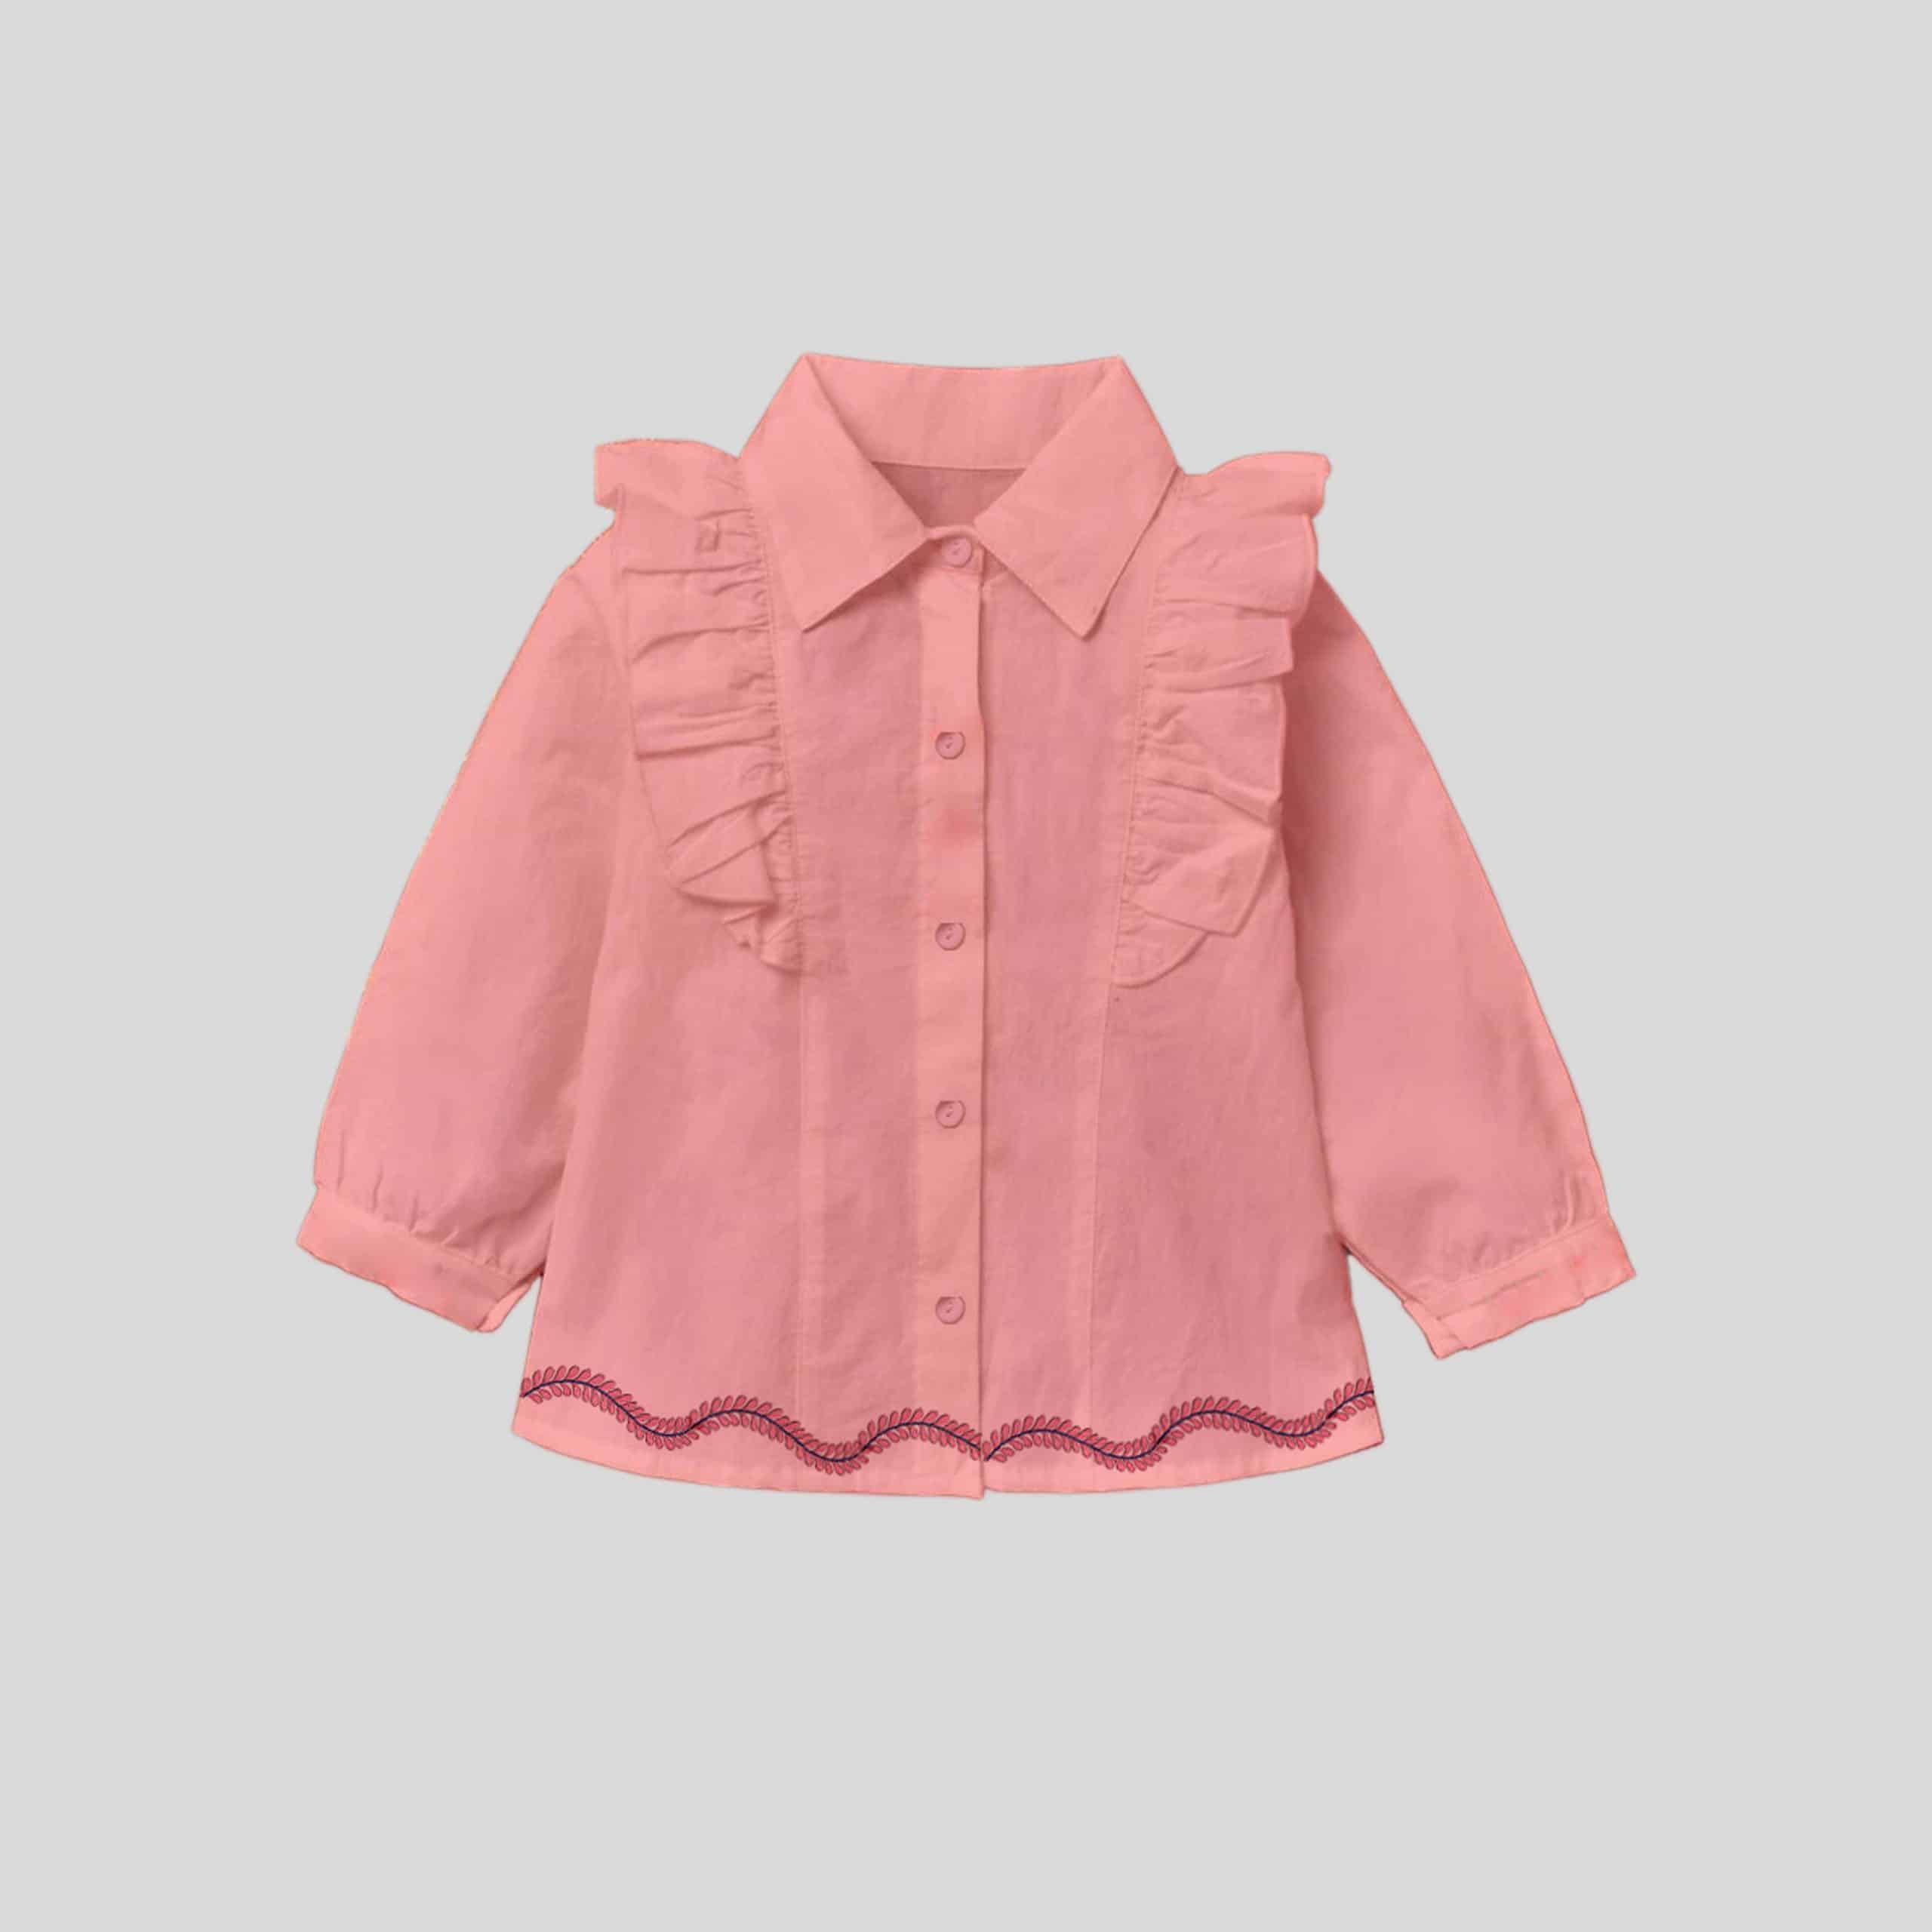 Girls Pink Frill Top with Cute Floral Print - RKFCW329